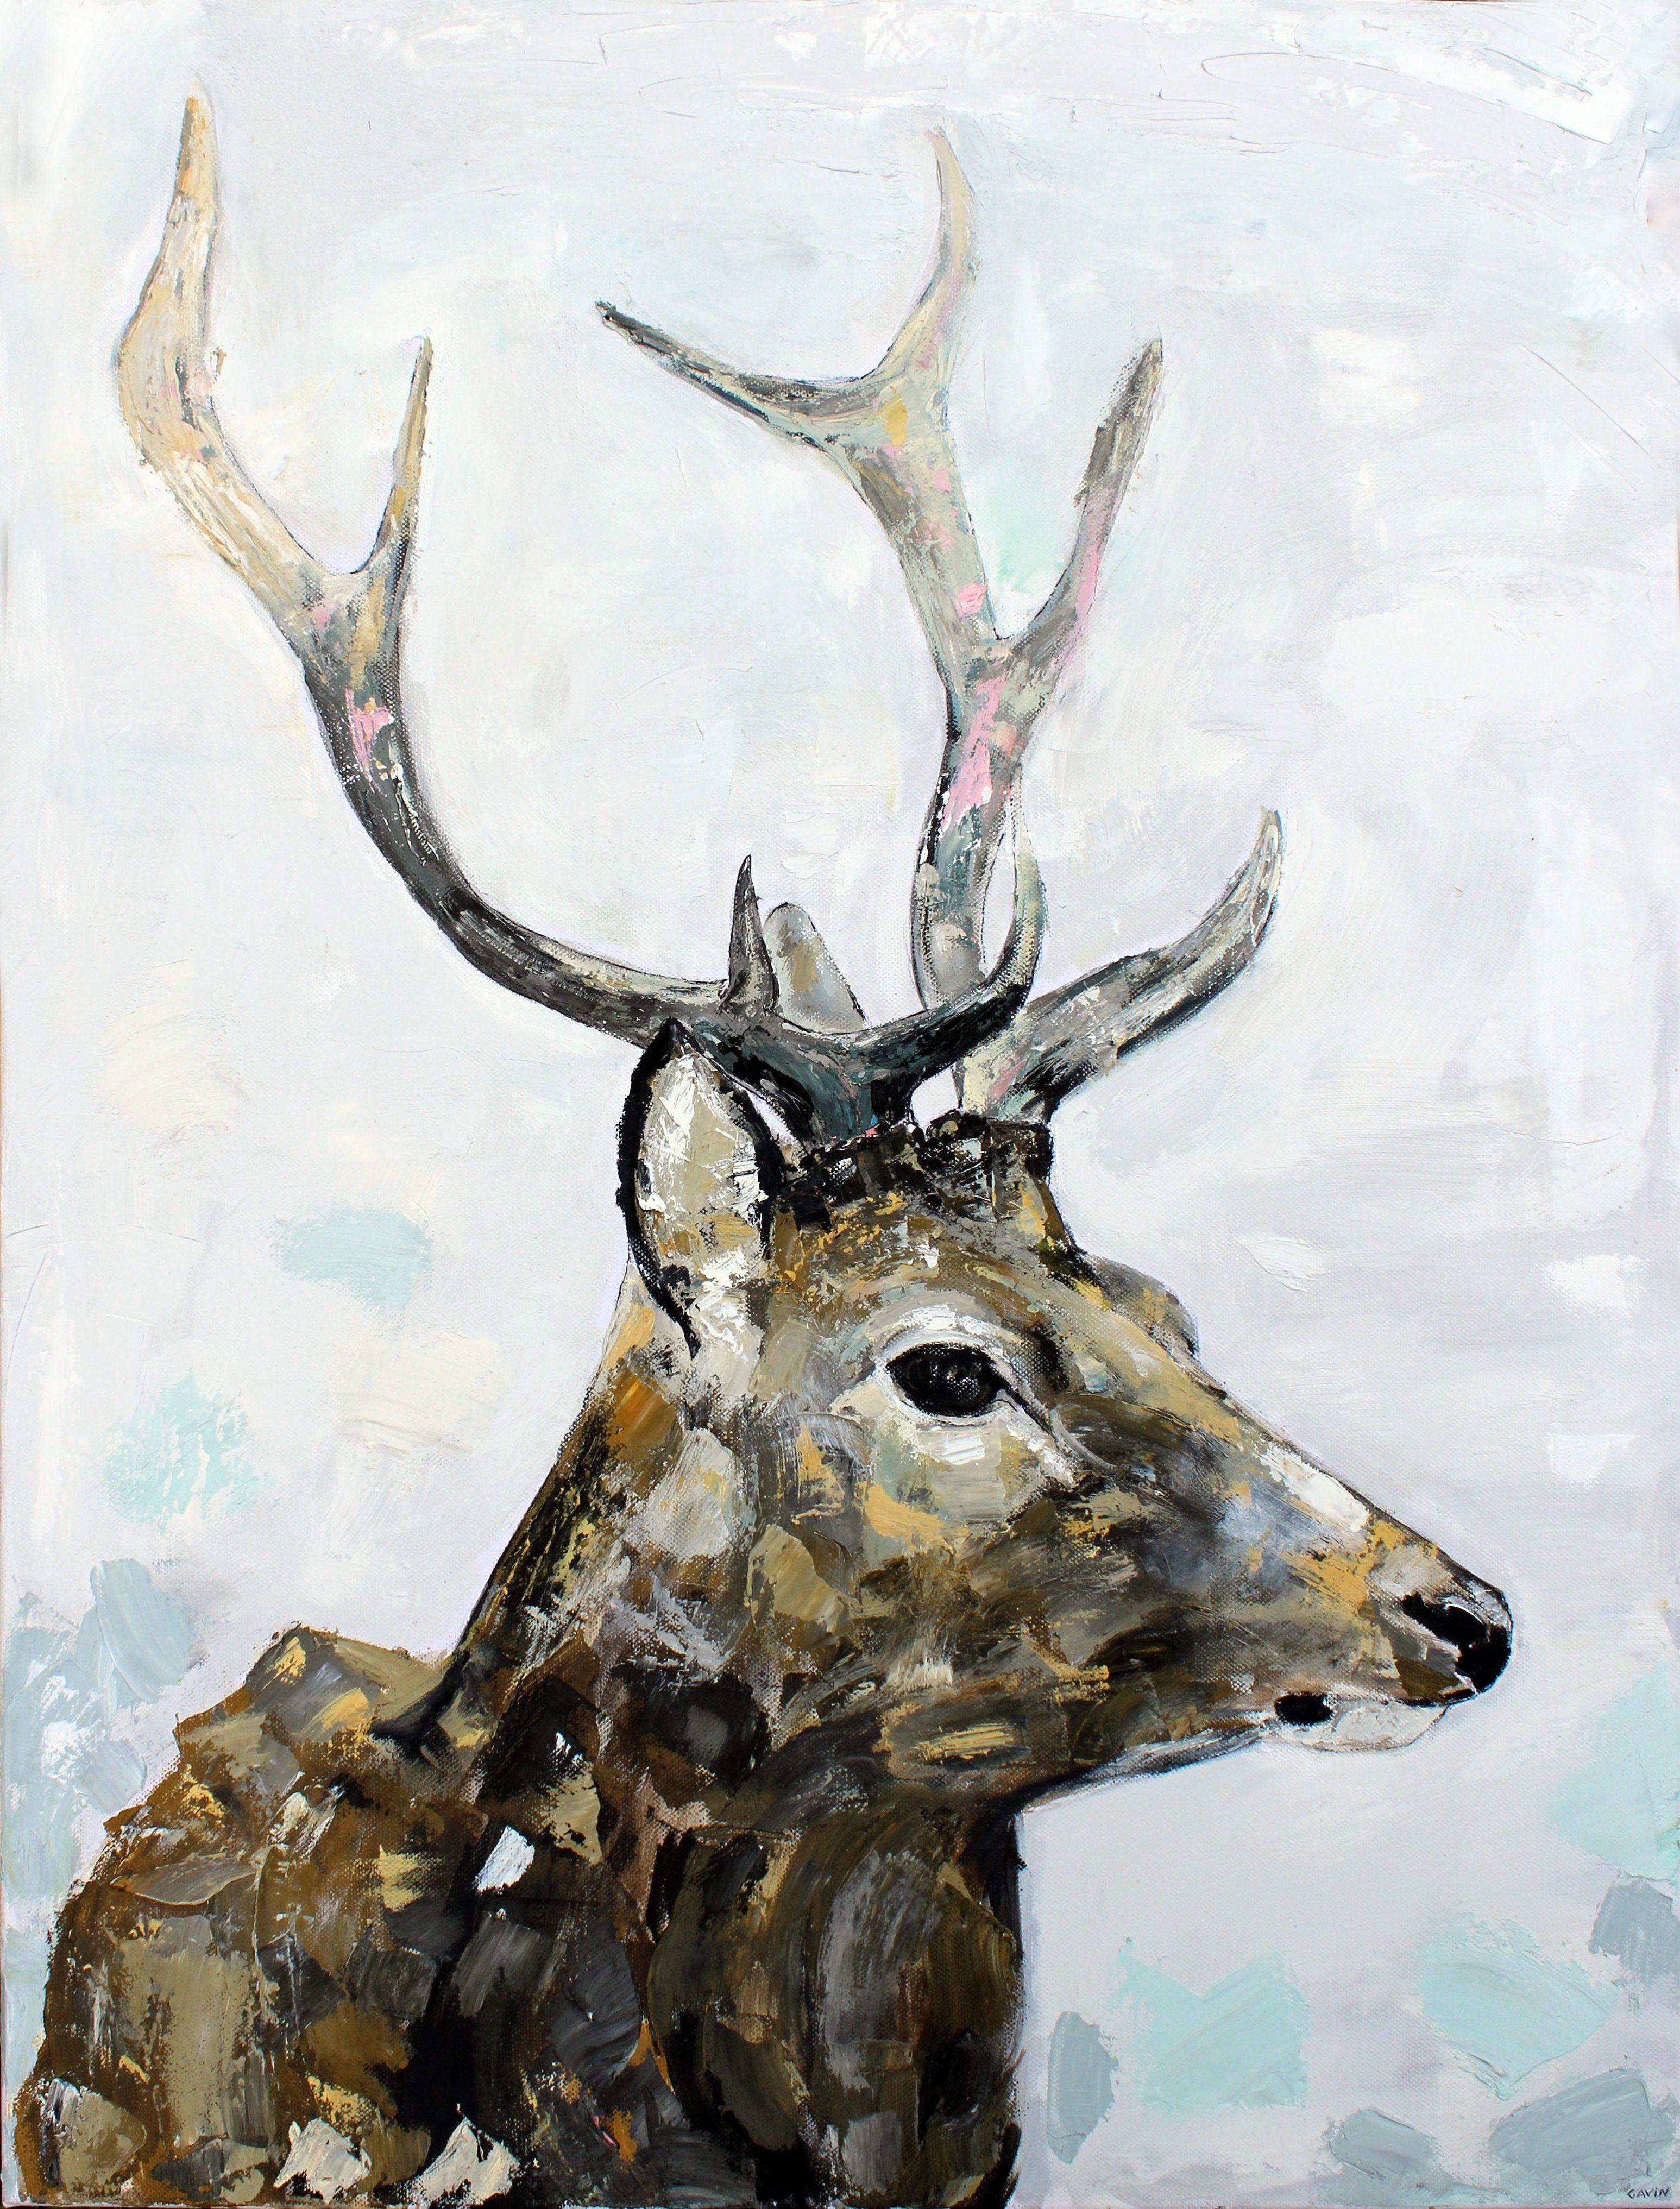 Oil on canvas painting based on a stag from Phoenix Park in Dublin. The painting uses bold brush strokes in combination with palette knives. A multitude of tones are used to capture the stags elegant coat. These beautiful creatures should only be